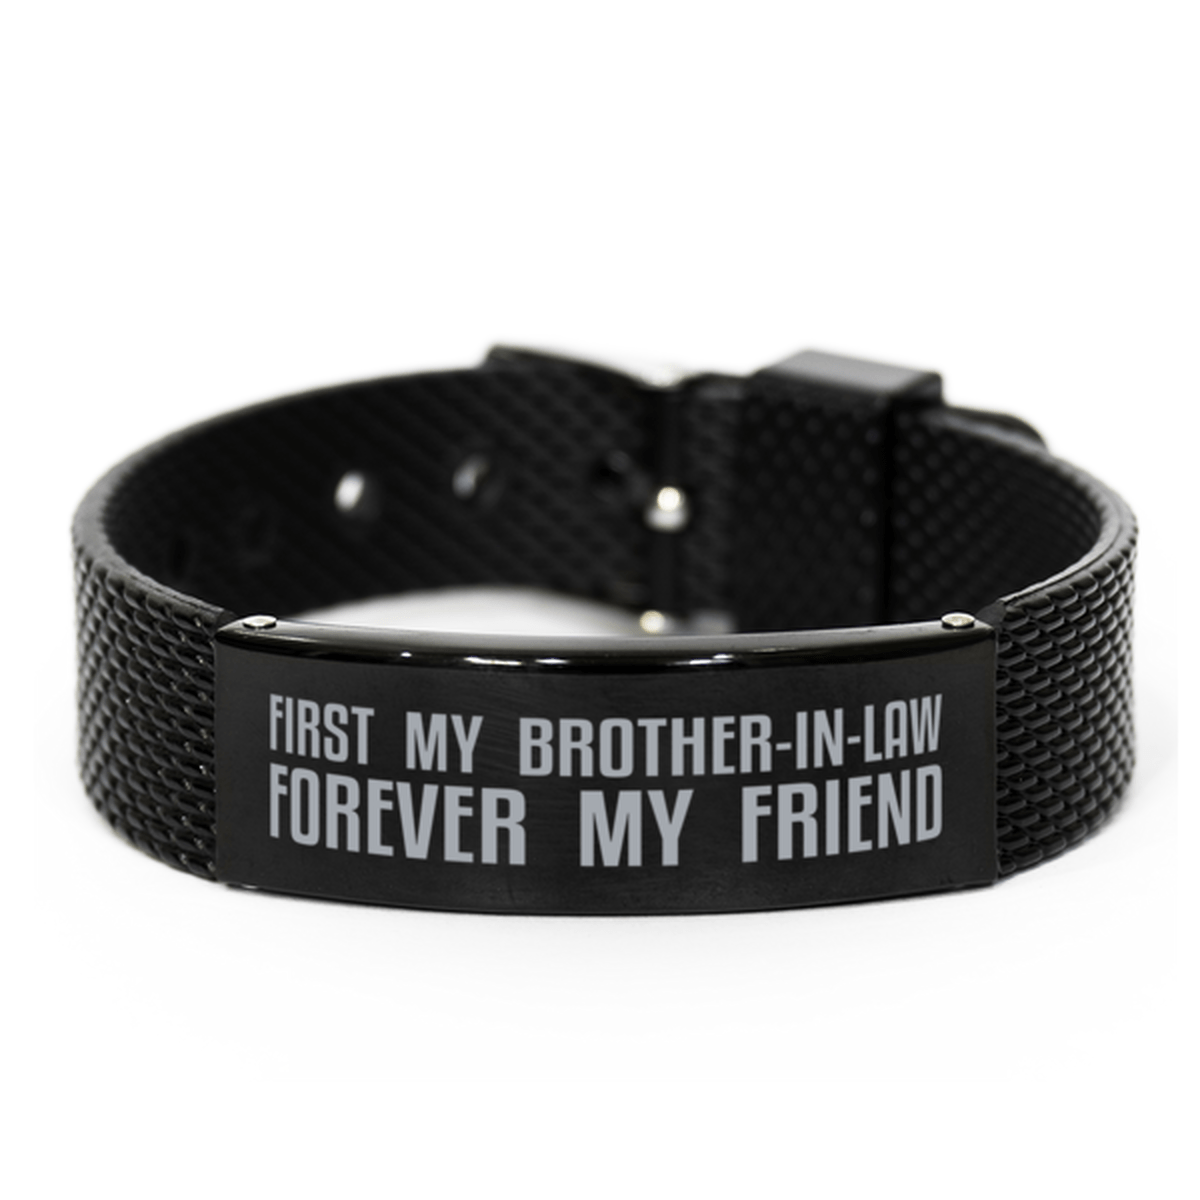 Unique Brother-in-law Black Shark Mesh Bracelet, First My Brother-in-law Forever My Friend, Best Gift for Brother-in-law Birthday, Christmas